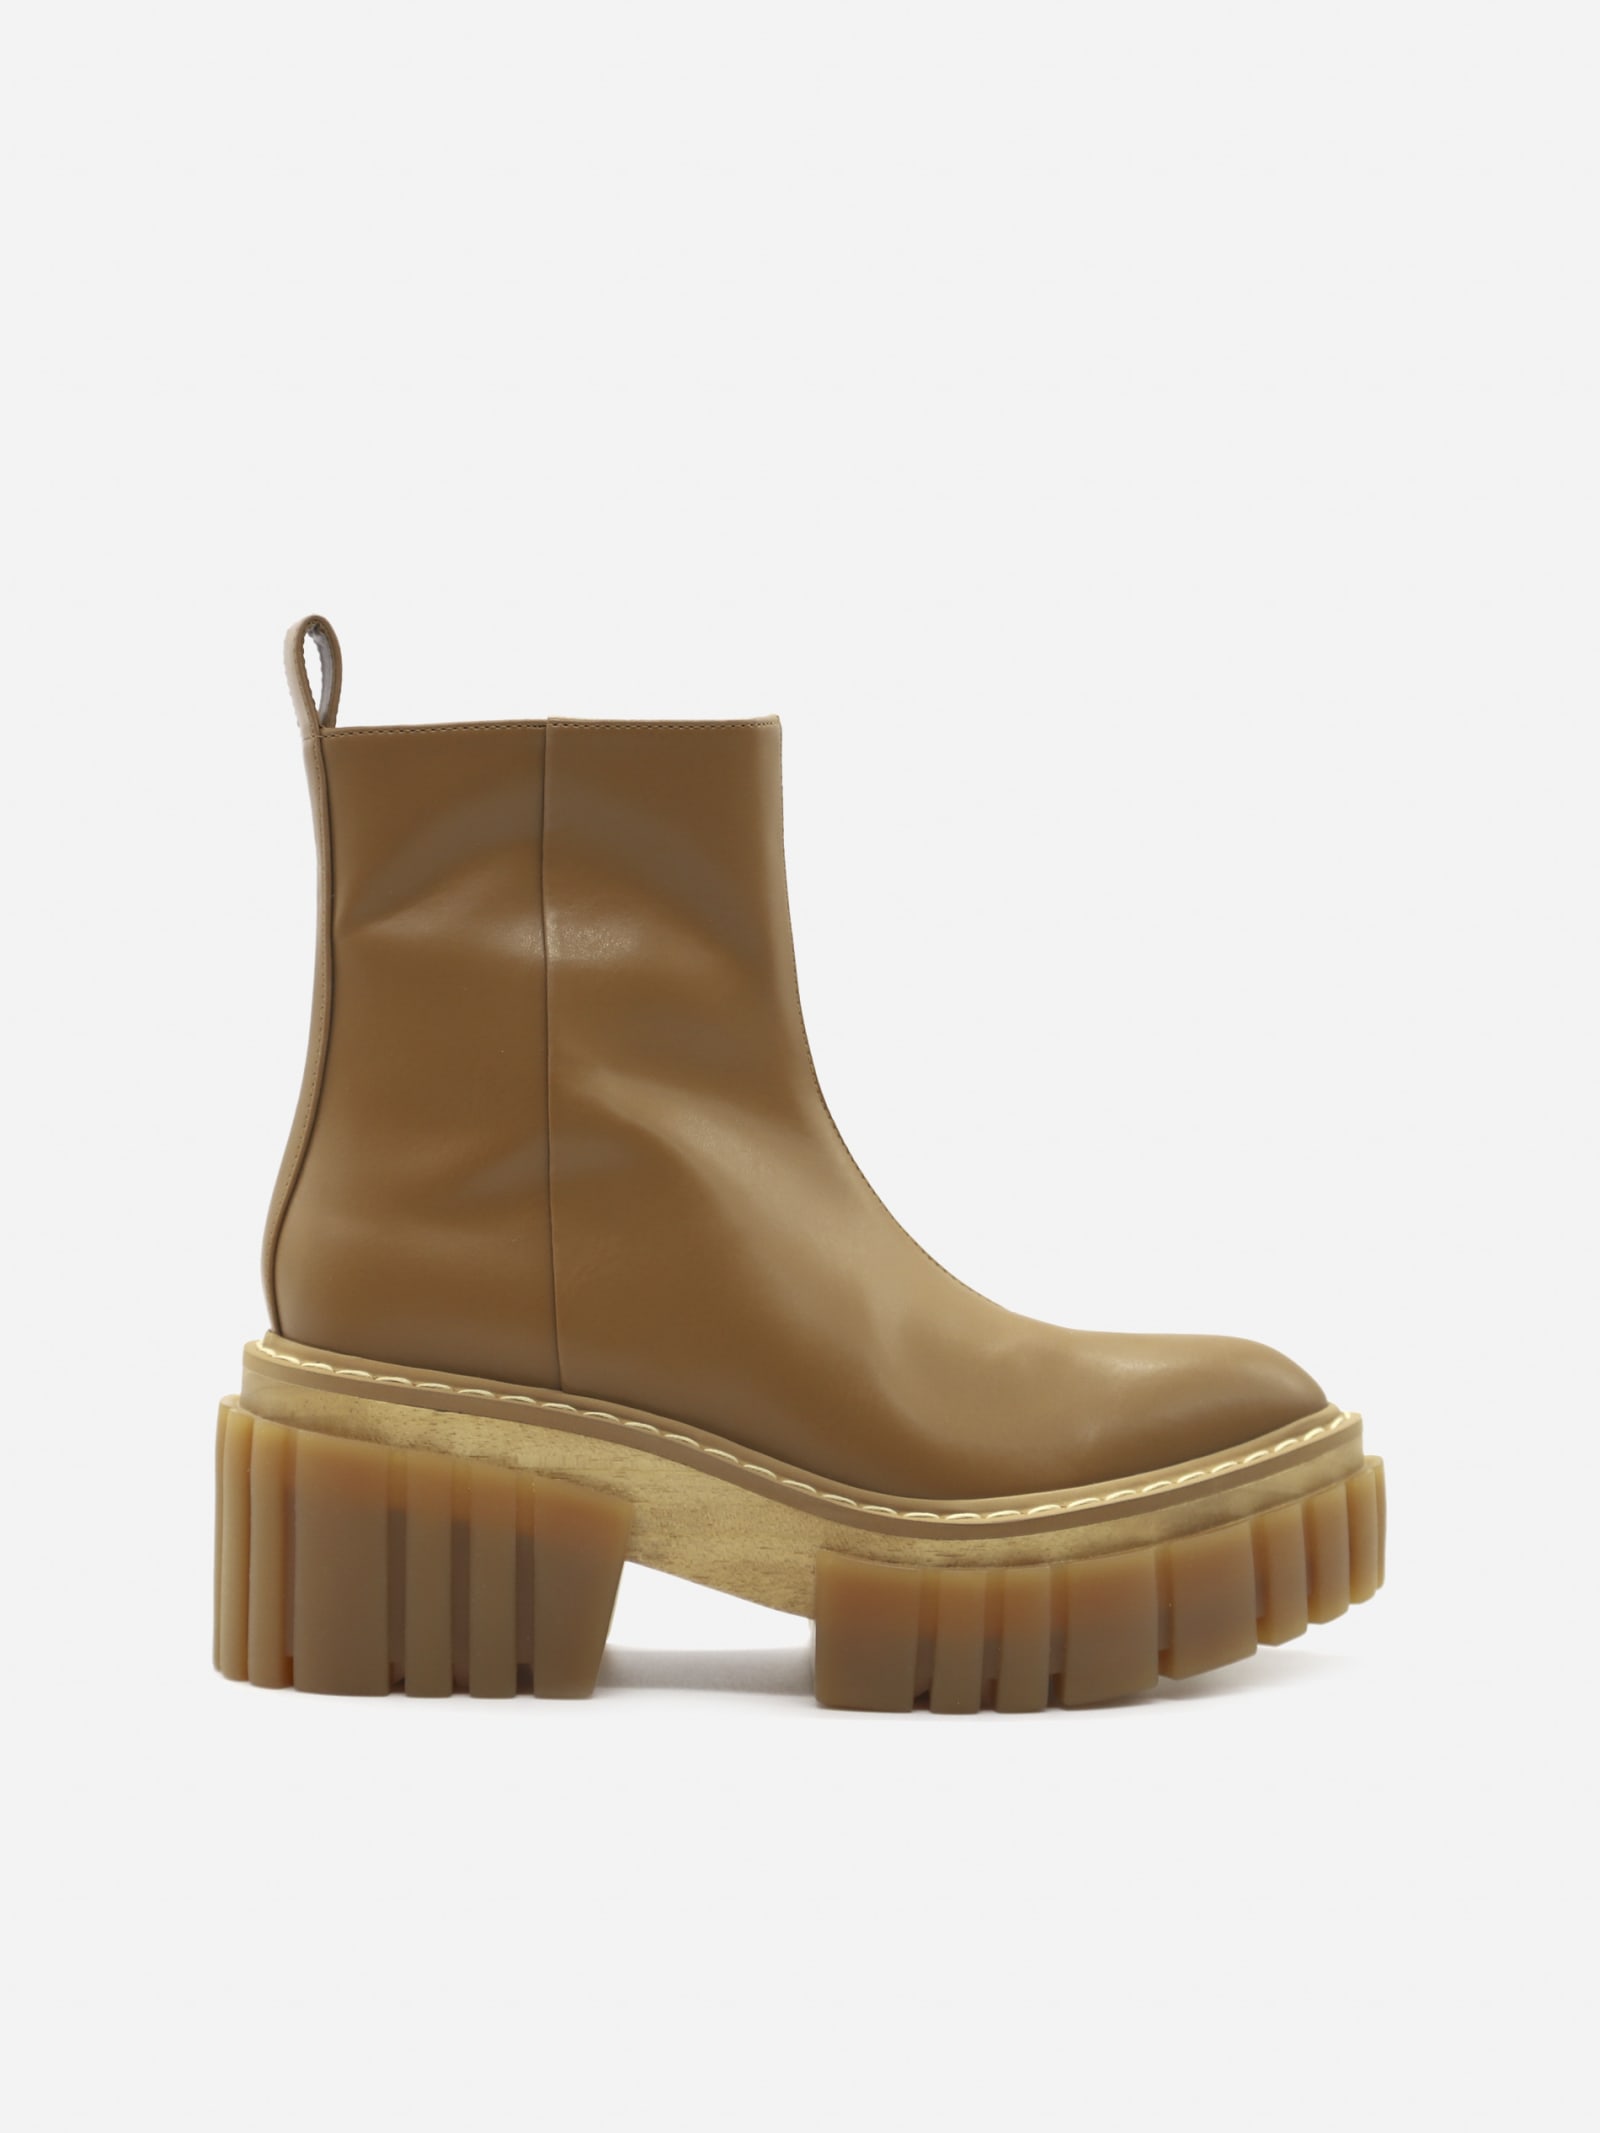 Buy Stella McCartney Emilie Ankle Boots In Eco-alter Nappa online, shop Stella McCartney shoes with free shipping